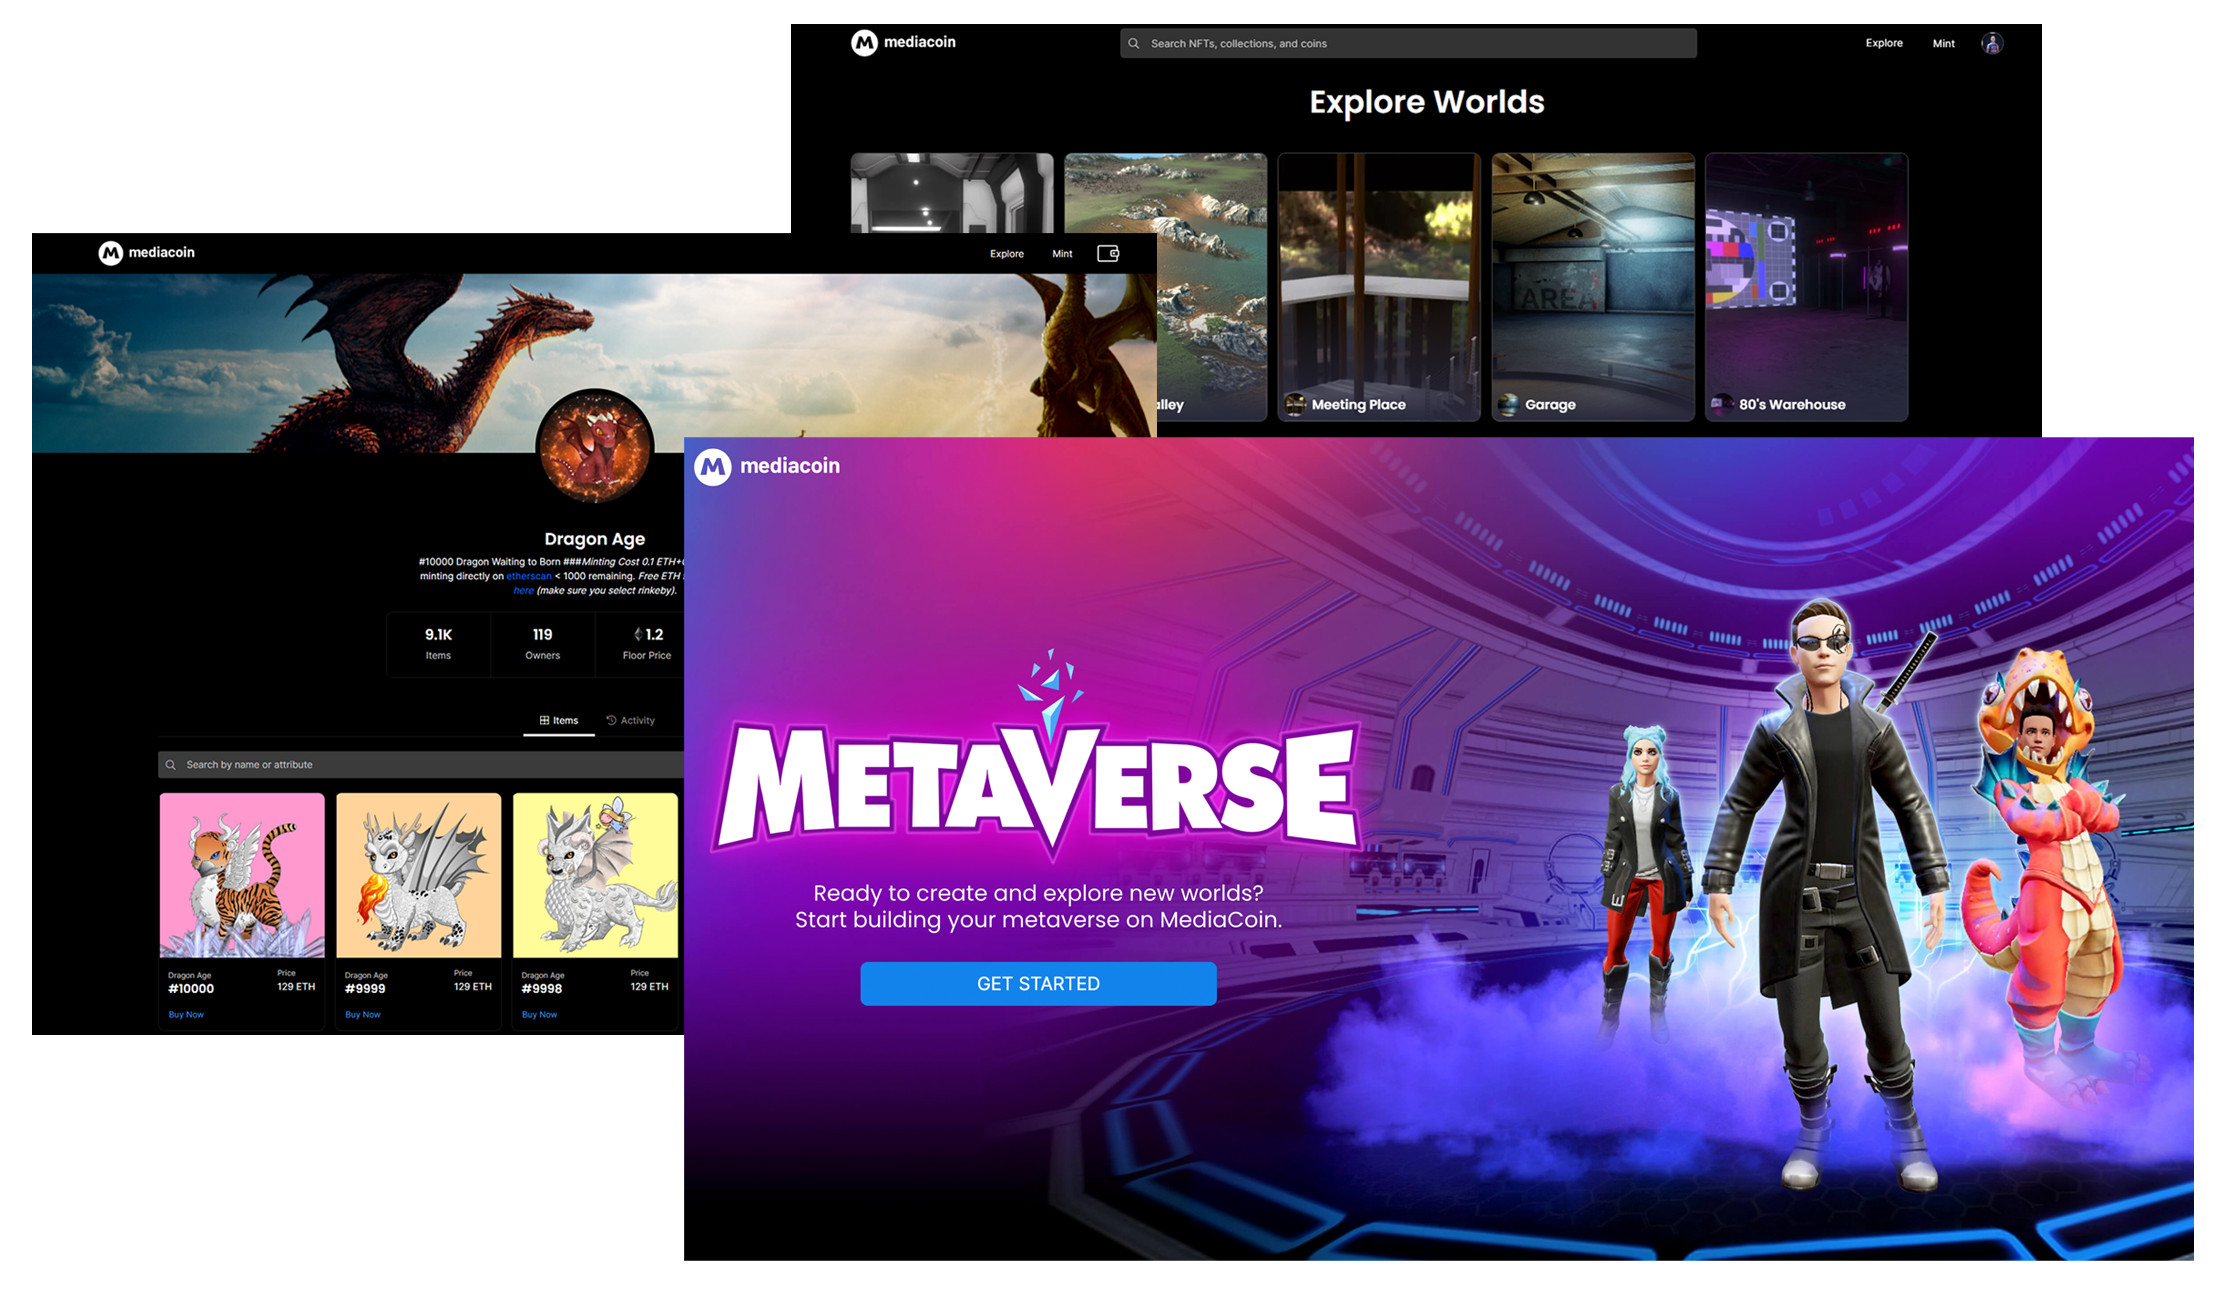 MediaCoin screen for creating and managing collections, as well as an inset of three metaverse gaming characters: a cybersoldier woman with a laser rifle, a glam-space-age panda with a helmet and guitar, and a mad scientist.